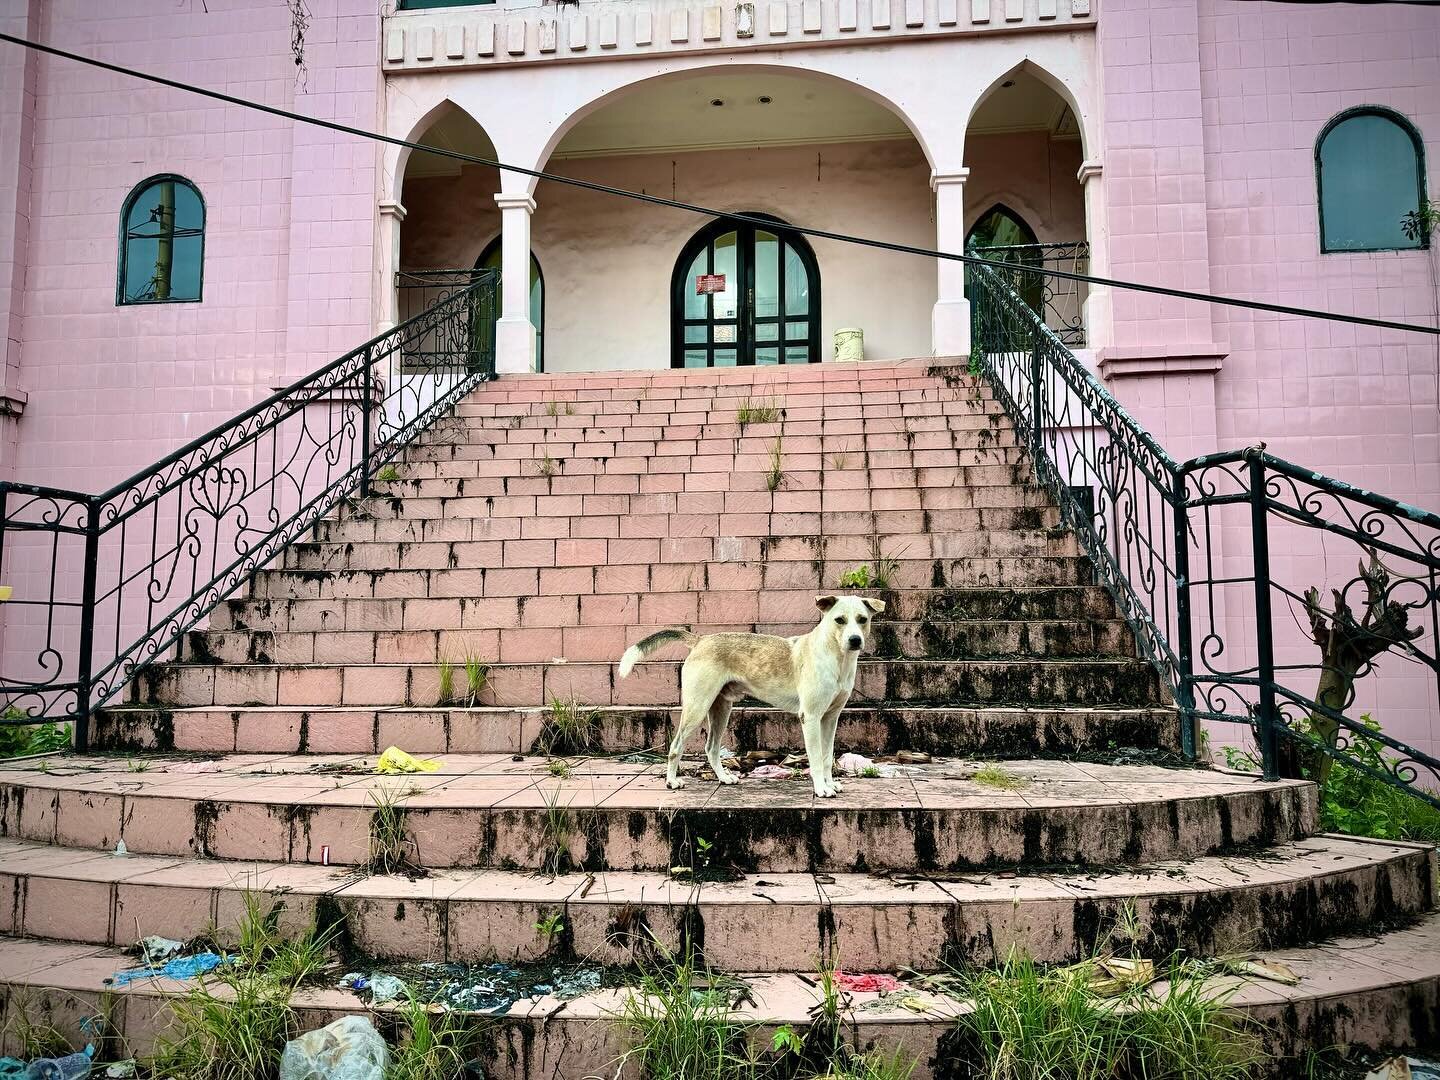 A stray dog on the steps of a large pink house in Kuta, Indonesia #ngphotographerchallenge